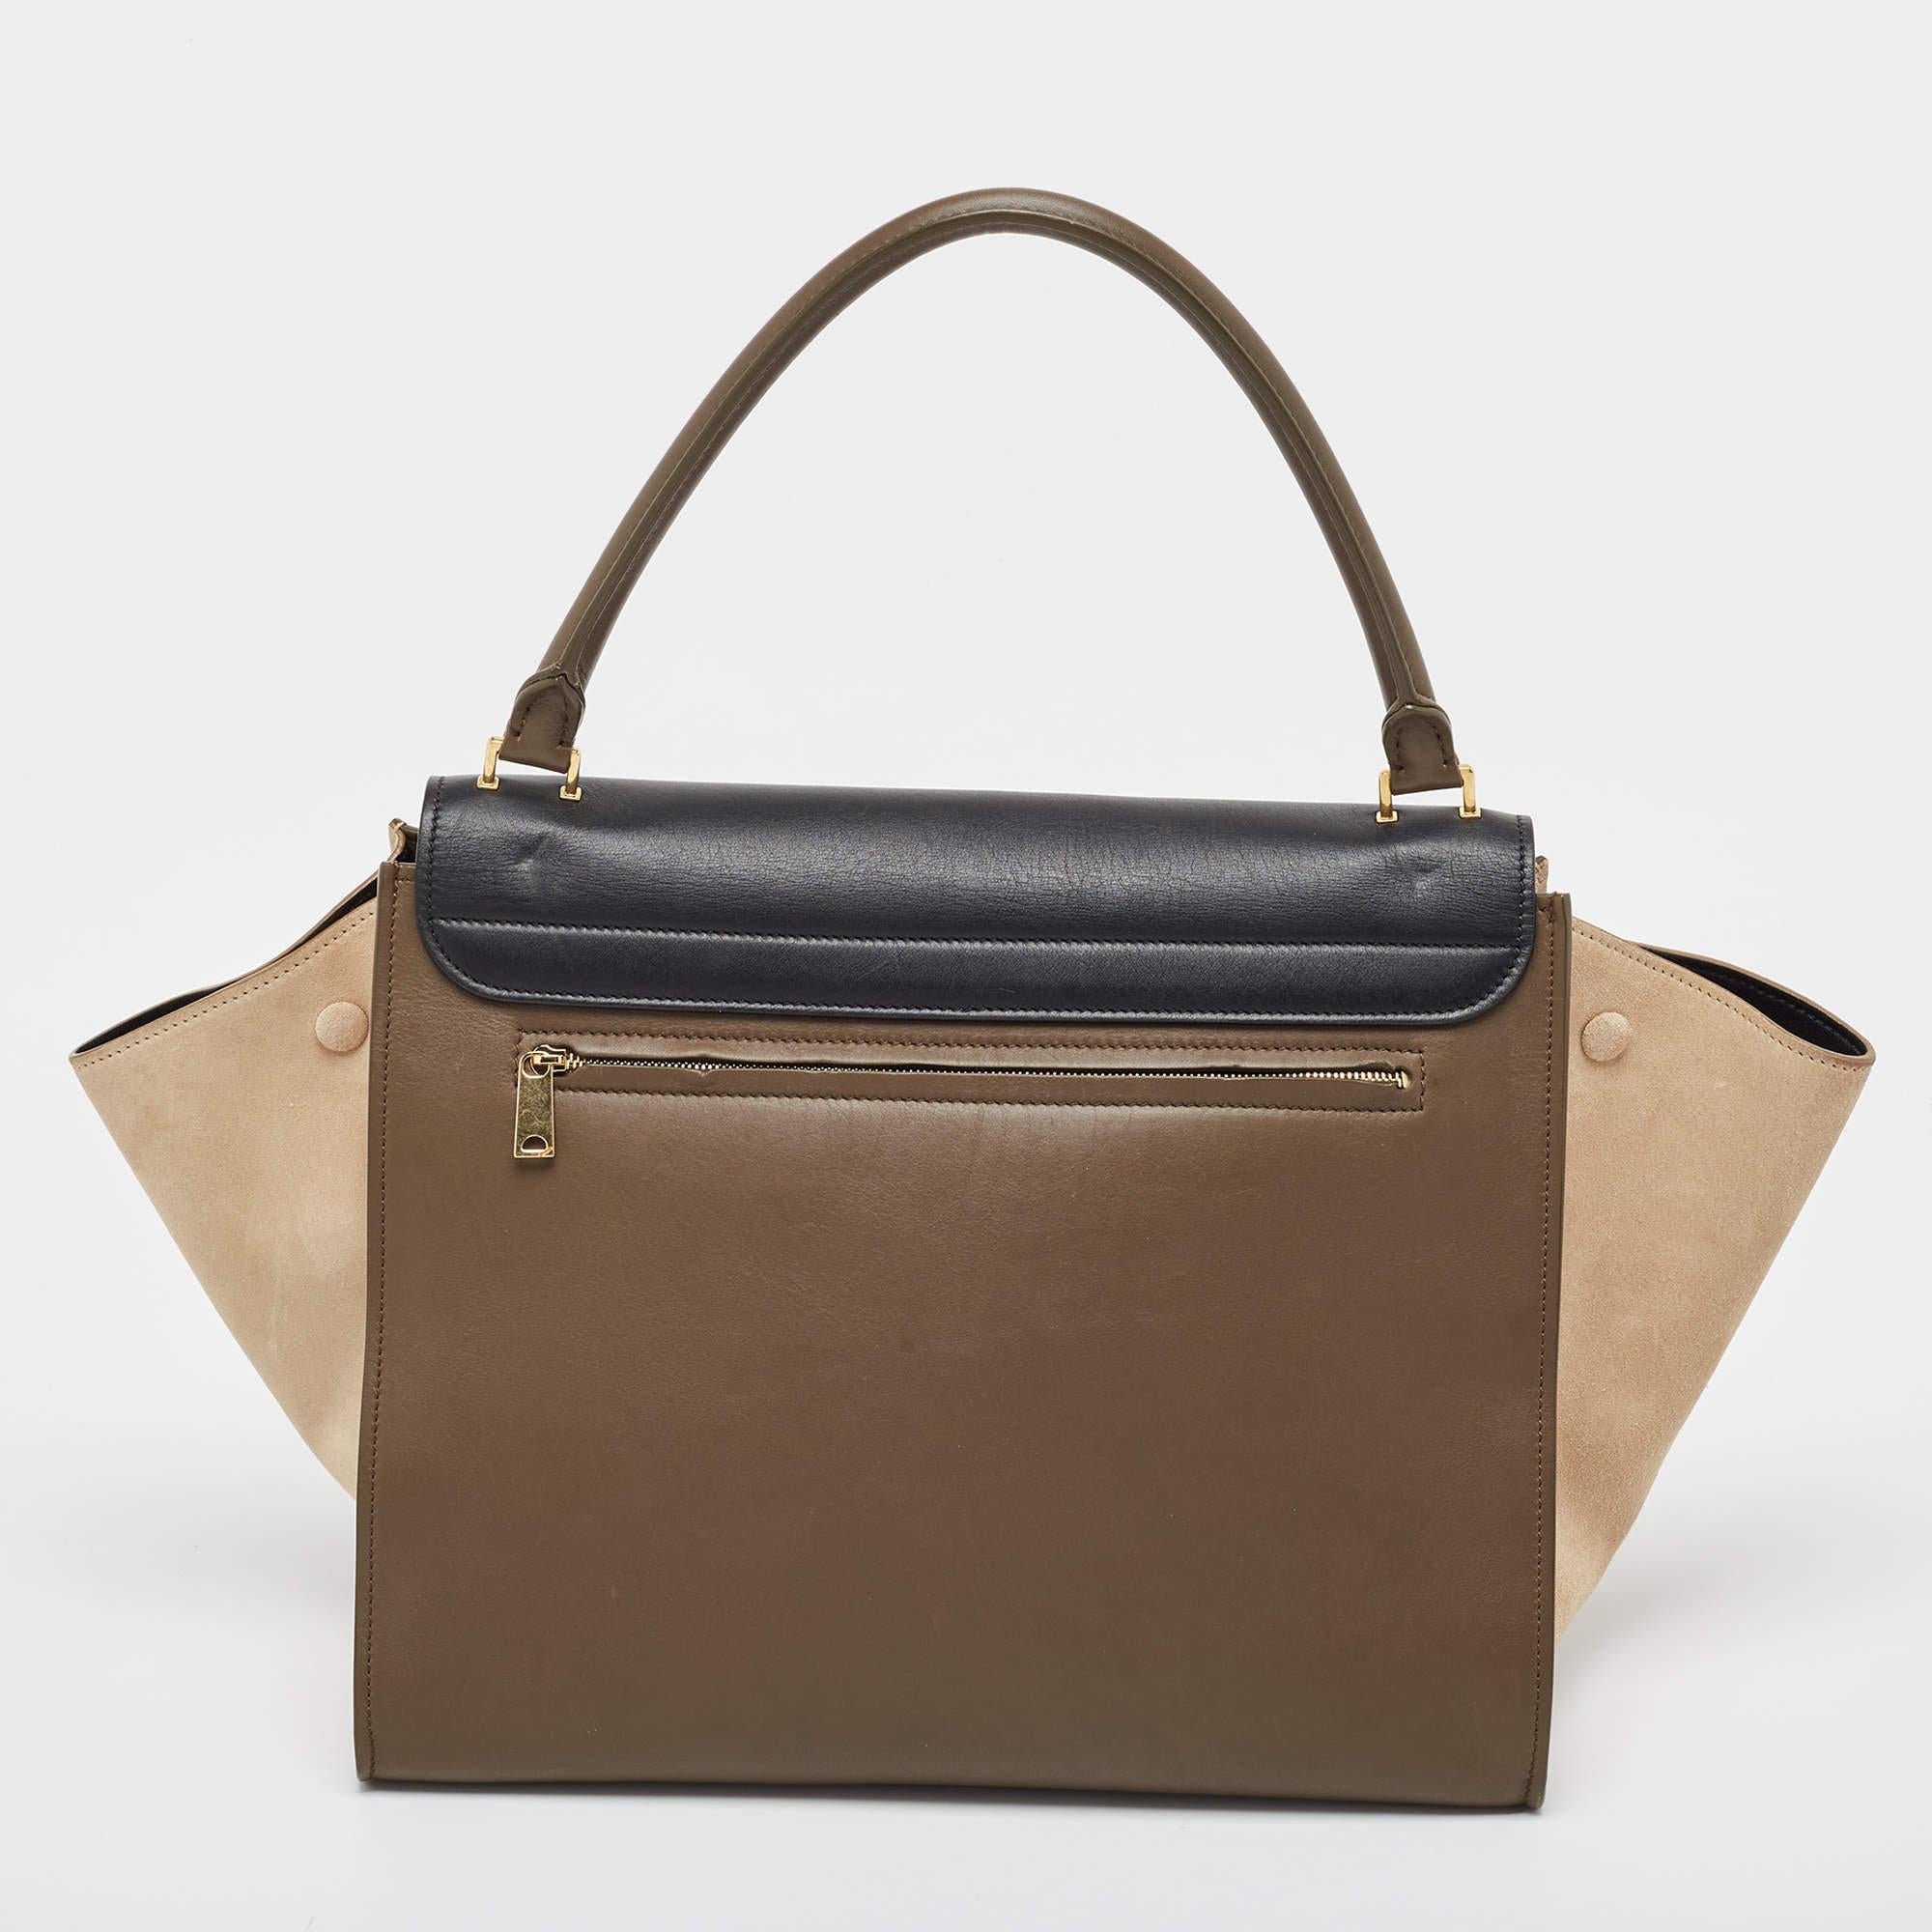 Designer bags are ideal companions for ample occasions! Here we have a fashion-meets-functionality piece crafted with precision. It has been equipped with a well-sized interior that can easily fit your essentials.

Includes: Original Dustbag, Info